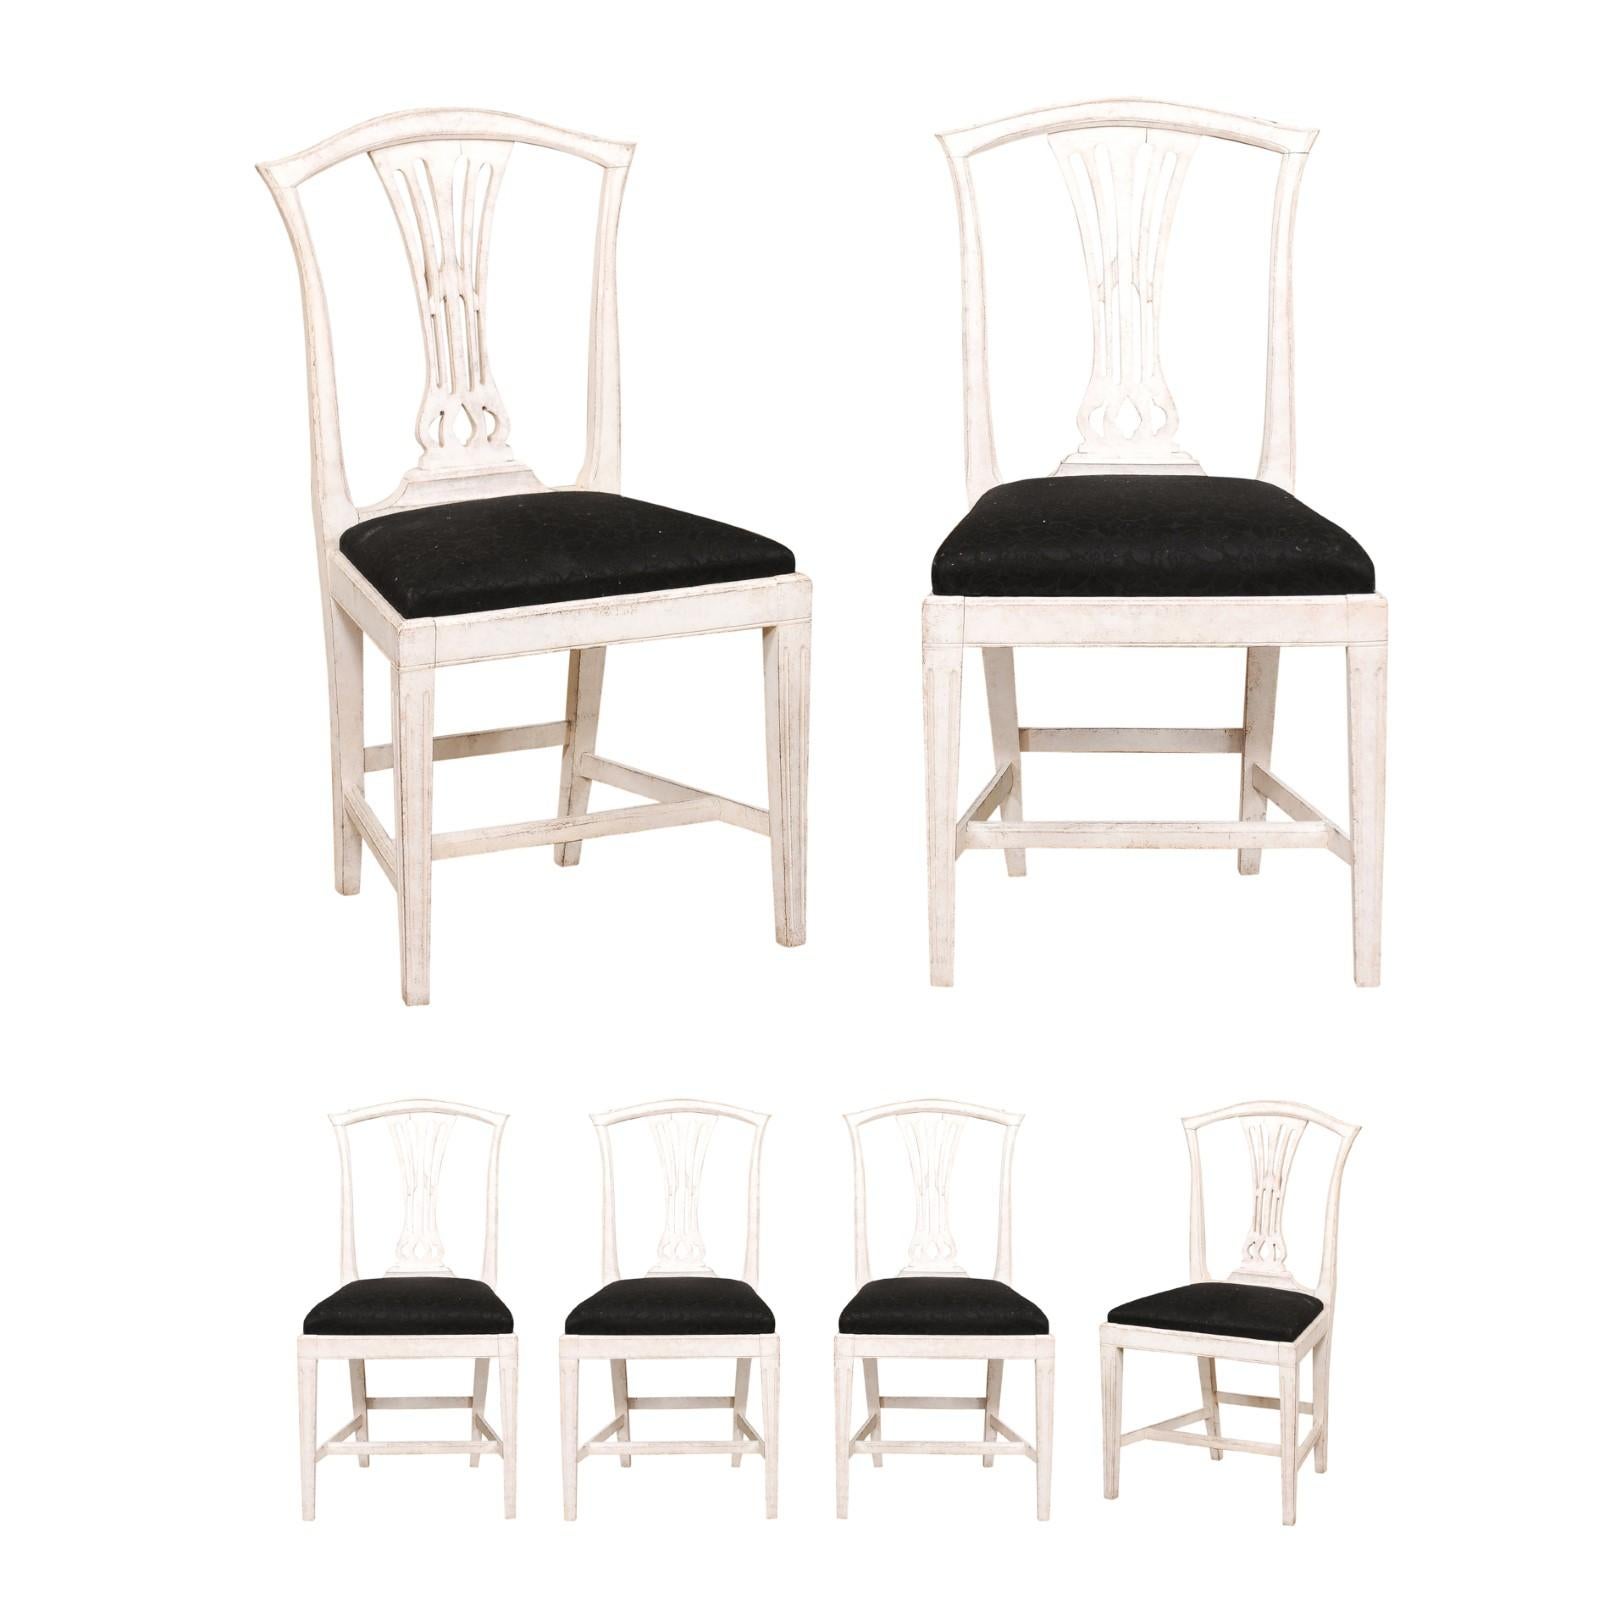 A set of six Swedish painted wood dining room side chairs from the late 19th century, with carved splats, tapering legs and black upholstery. Created in Sweden during the last decade of the 19th century, each of this set of six painted chairs